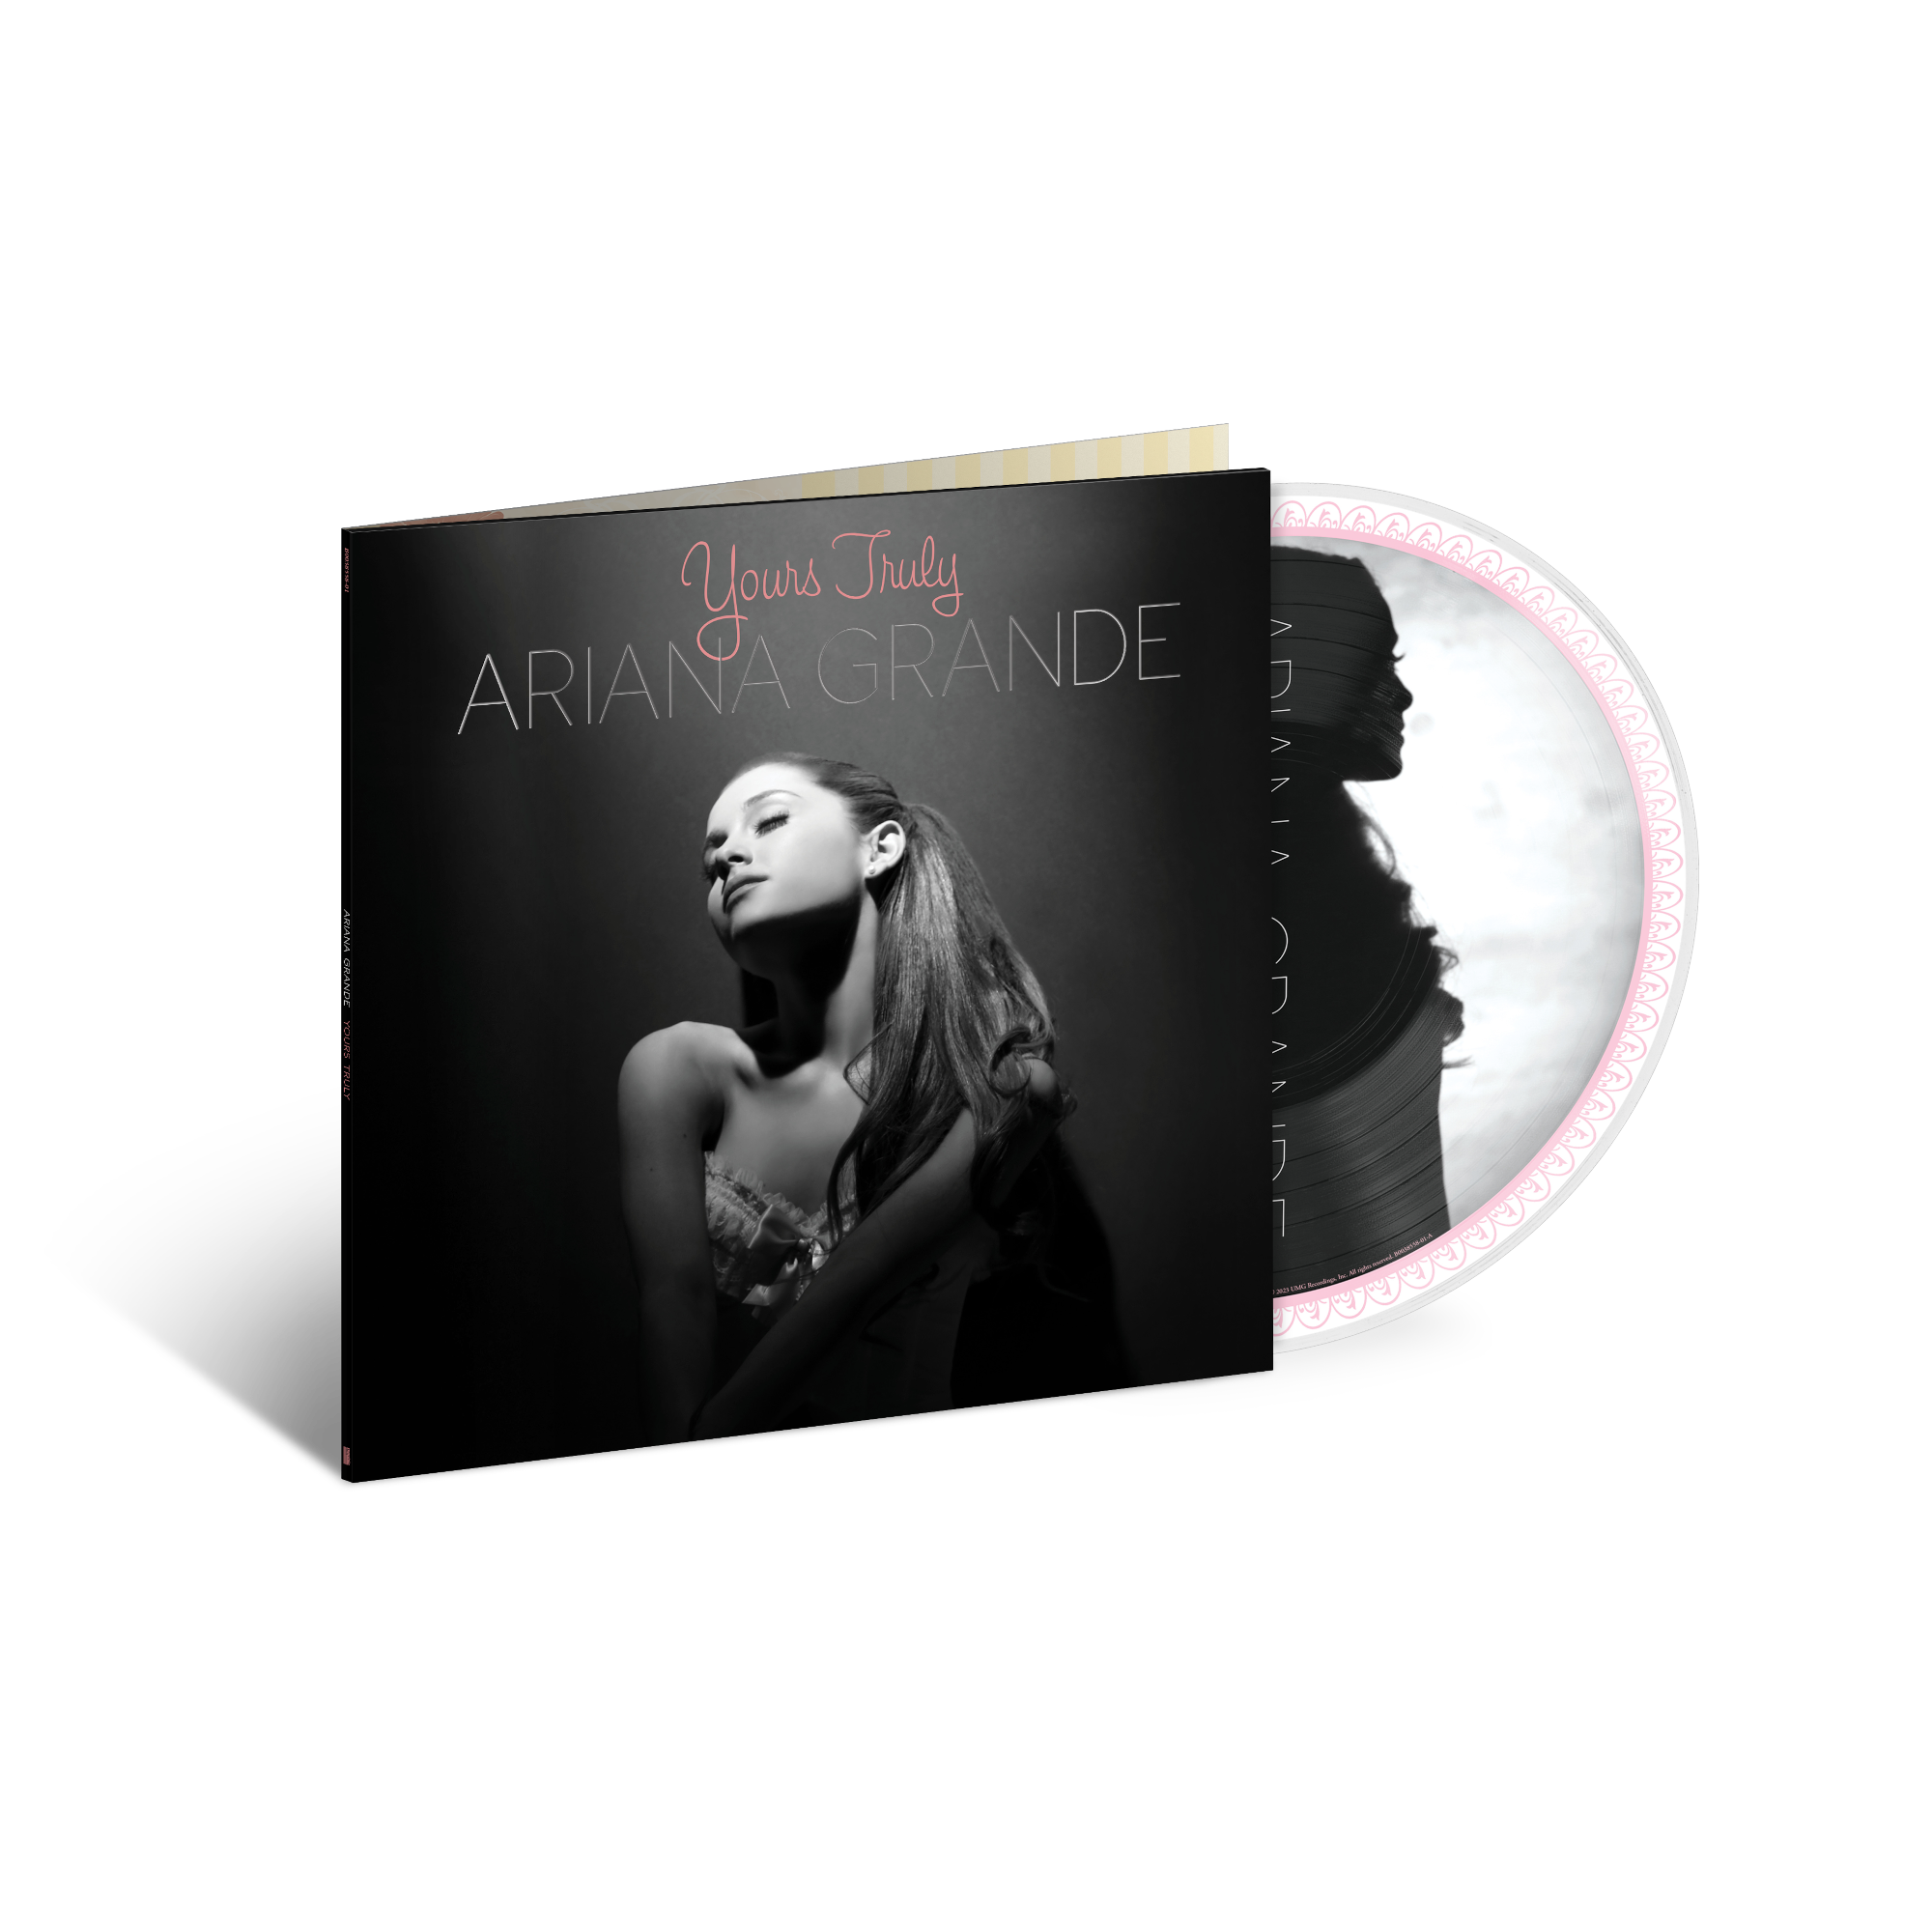 Universal Music Store - yours truly 10 year anniversary picture disc - Ariana  Grande - Vinyl